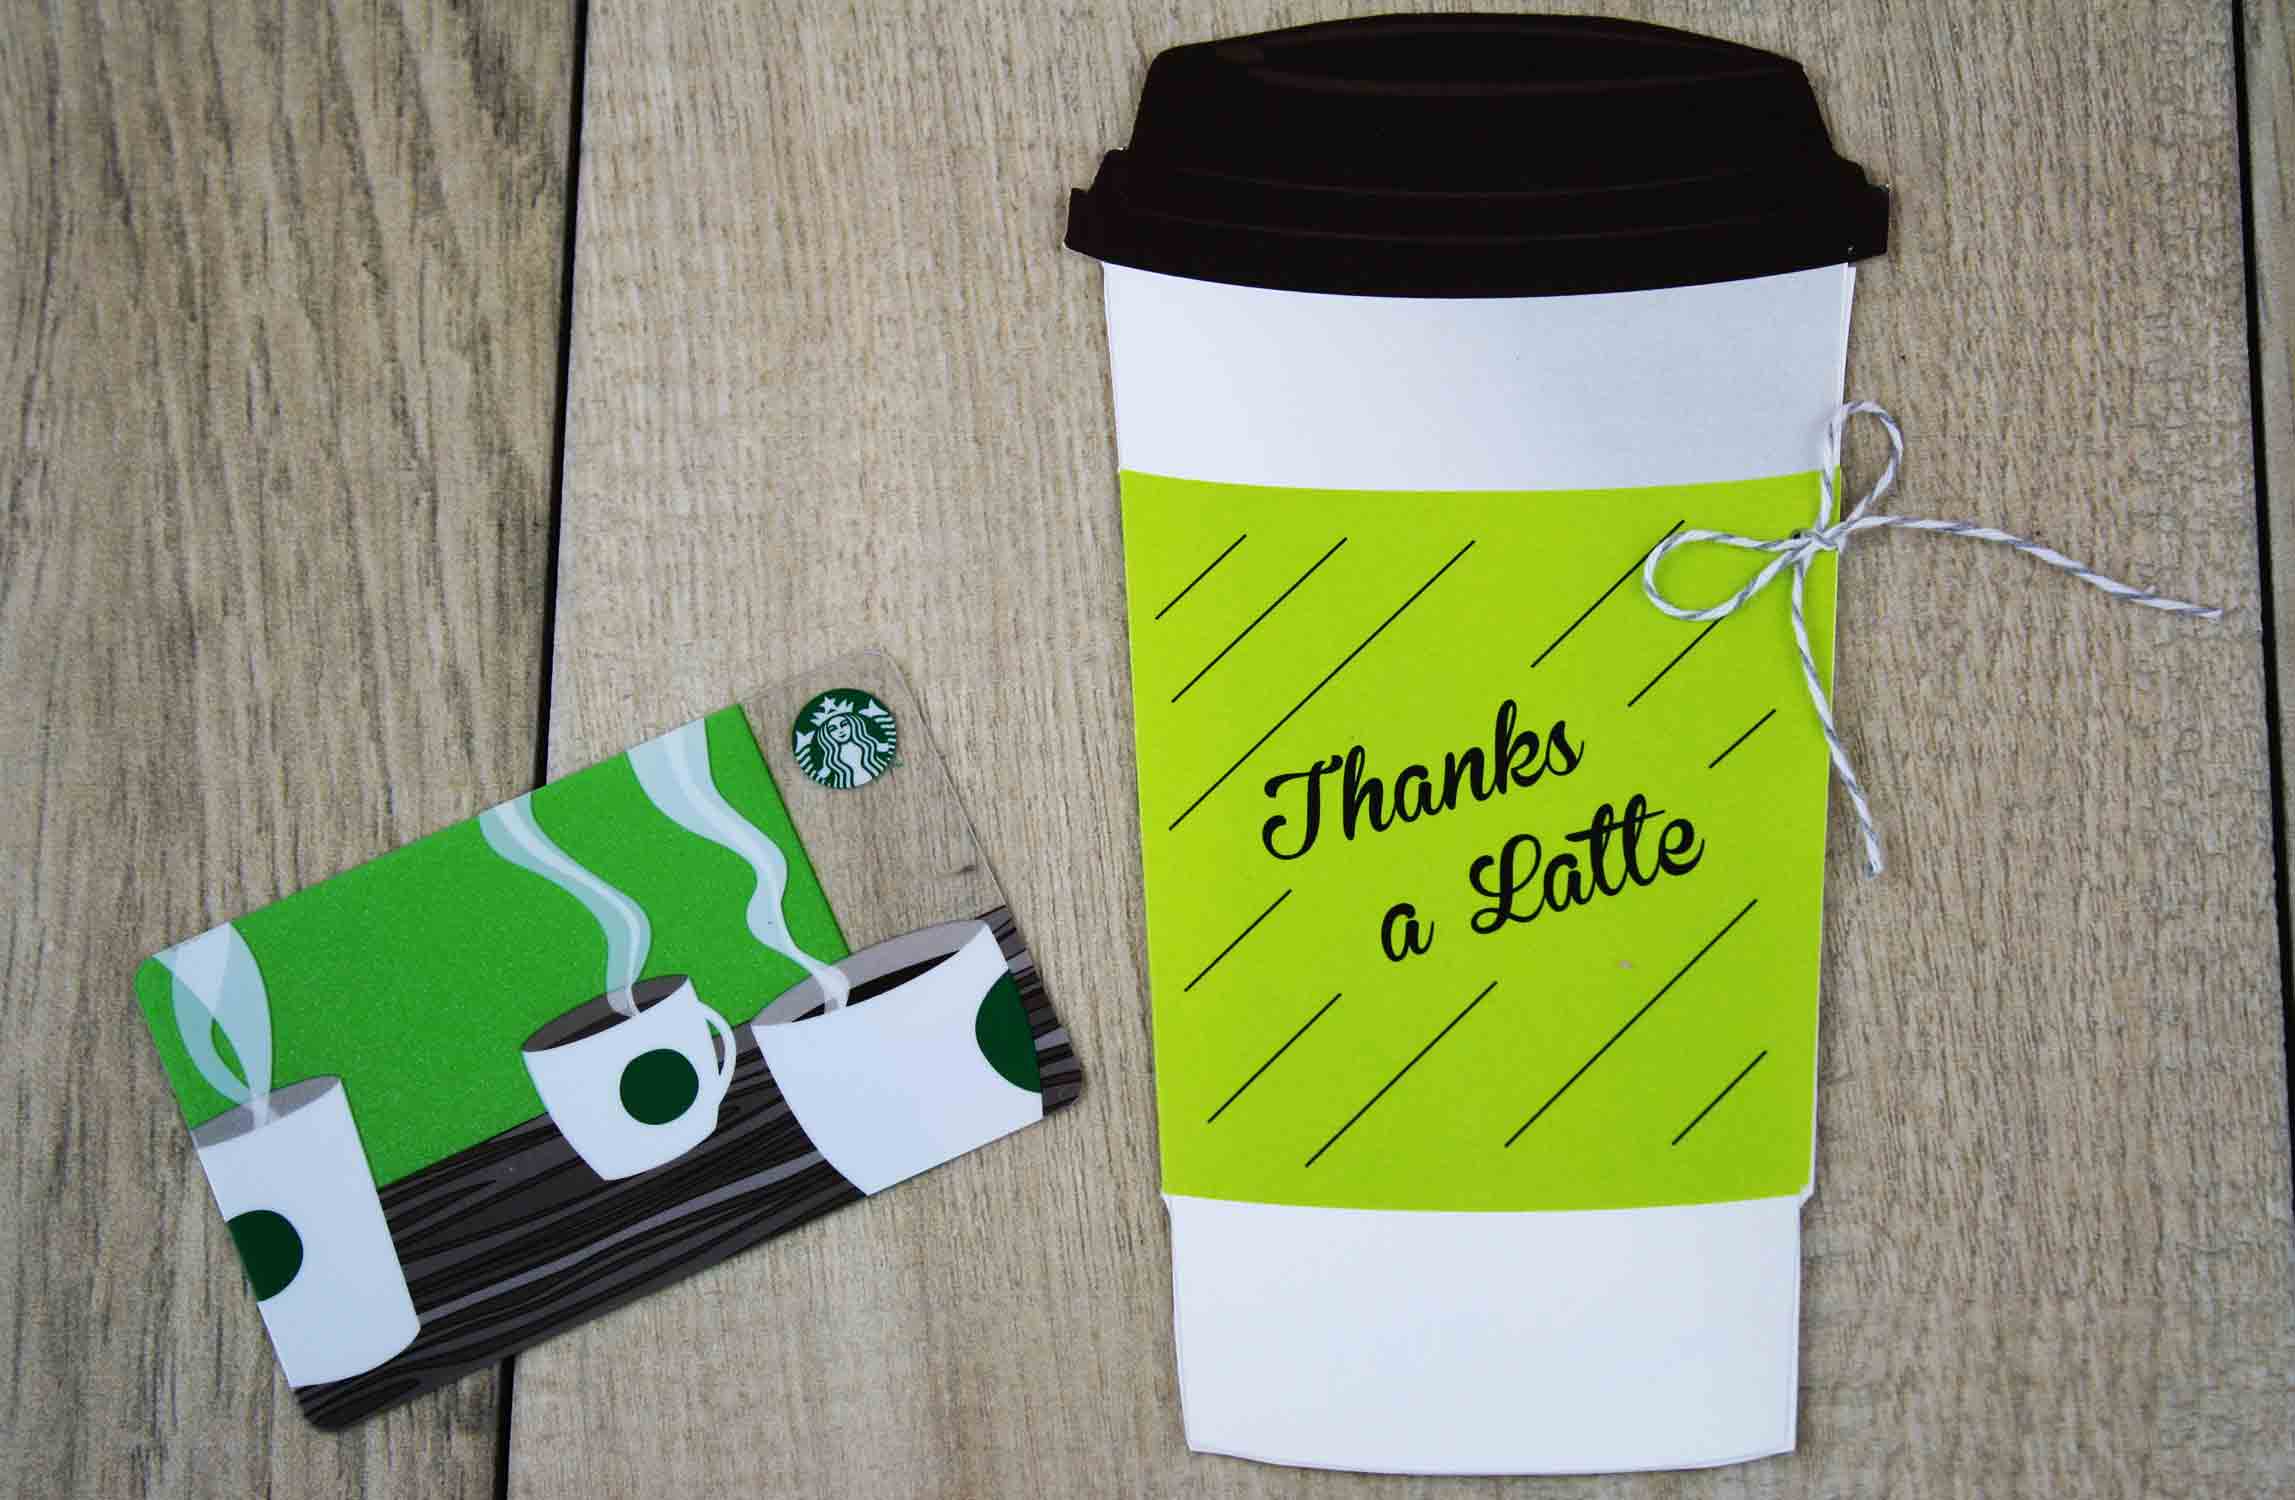 Coffee shaped gift card holder